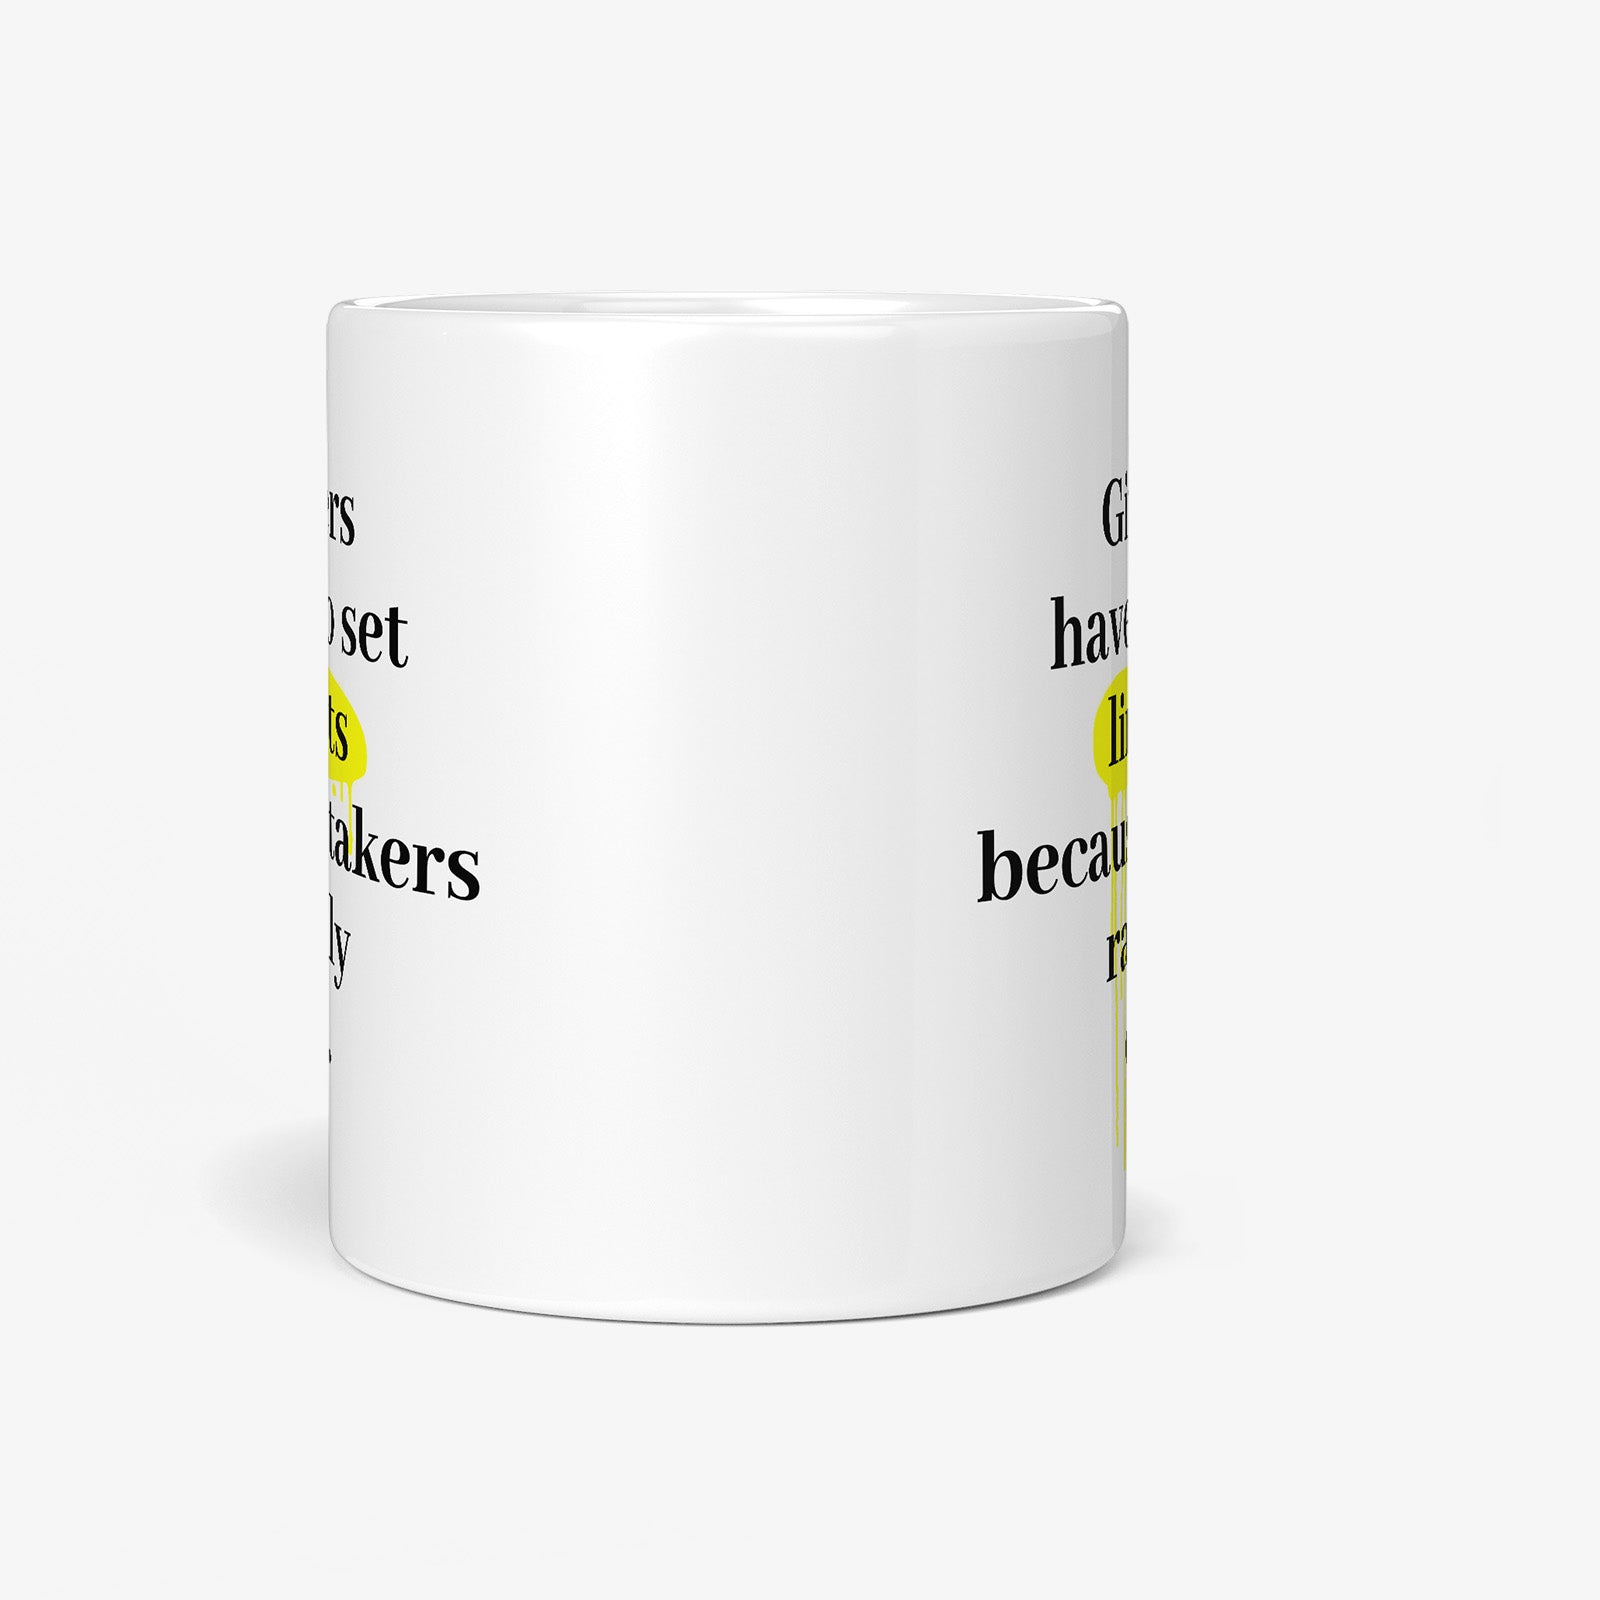 Be inspired by Henry Ford's famous quote, "Givers have to set limits because takers rarely do" on this white and glossy 11oz coffee mug with a front view.